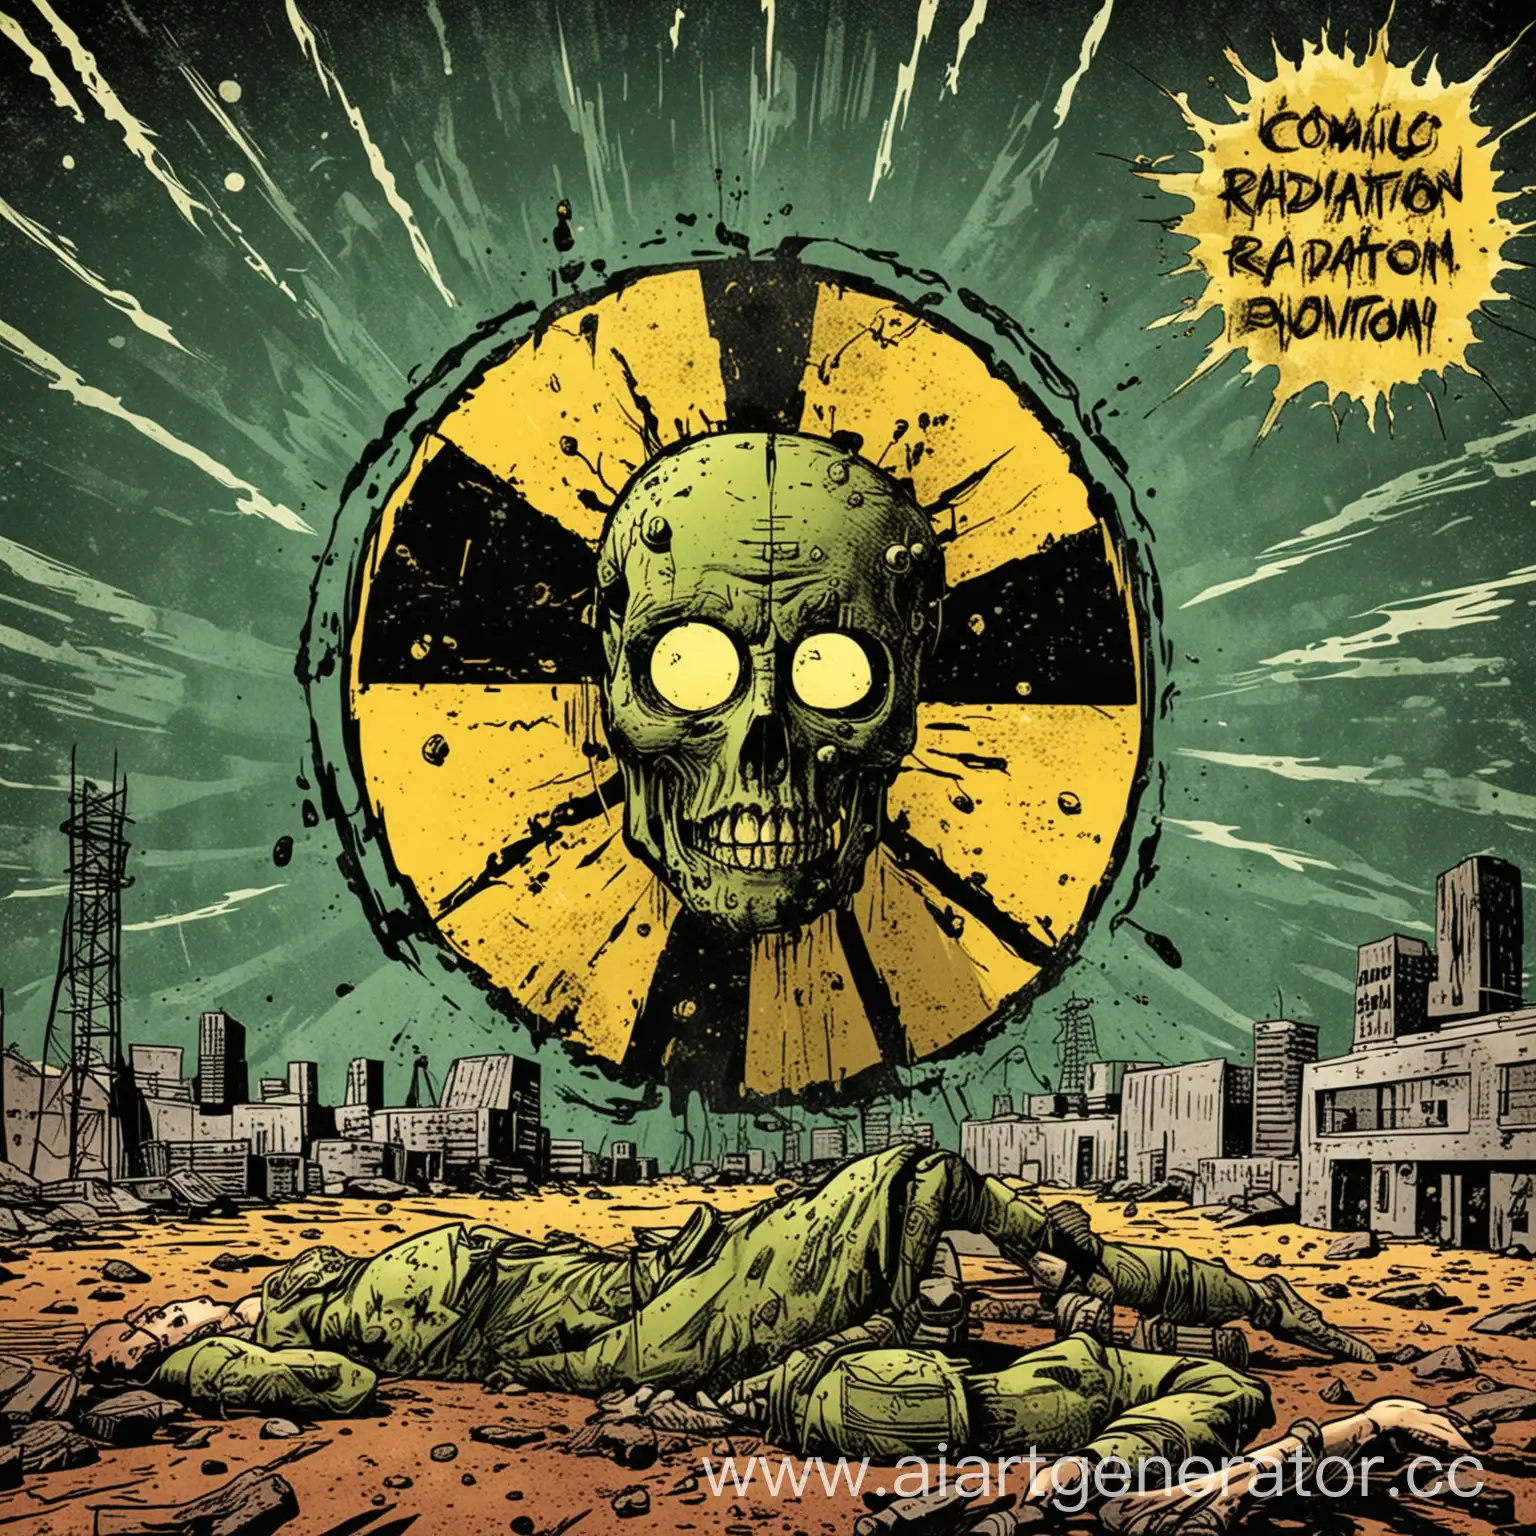 Comic-Style-Radiation-Scene-with-Vibrant-Colors-and-Dynamic-Action